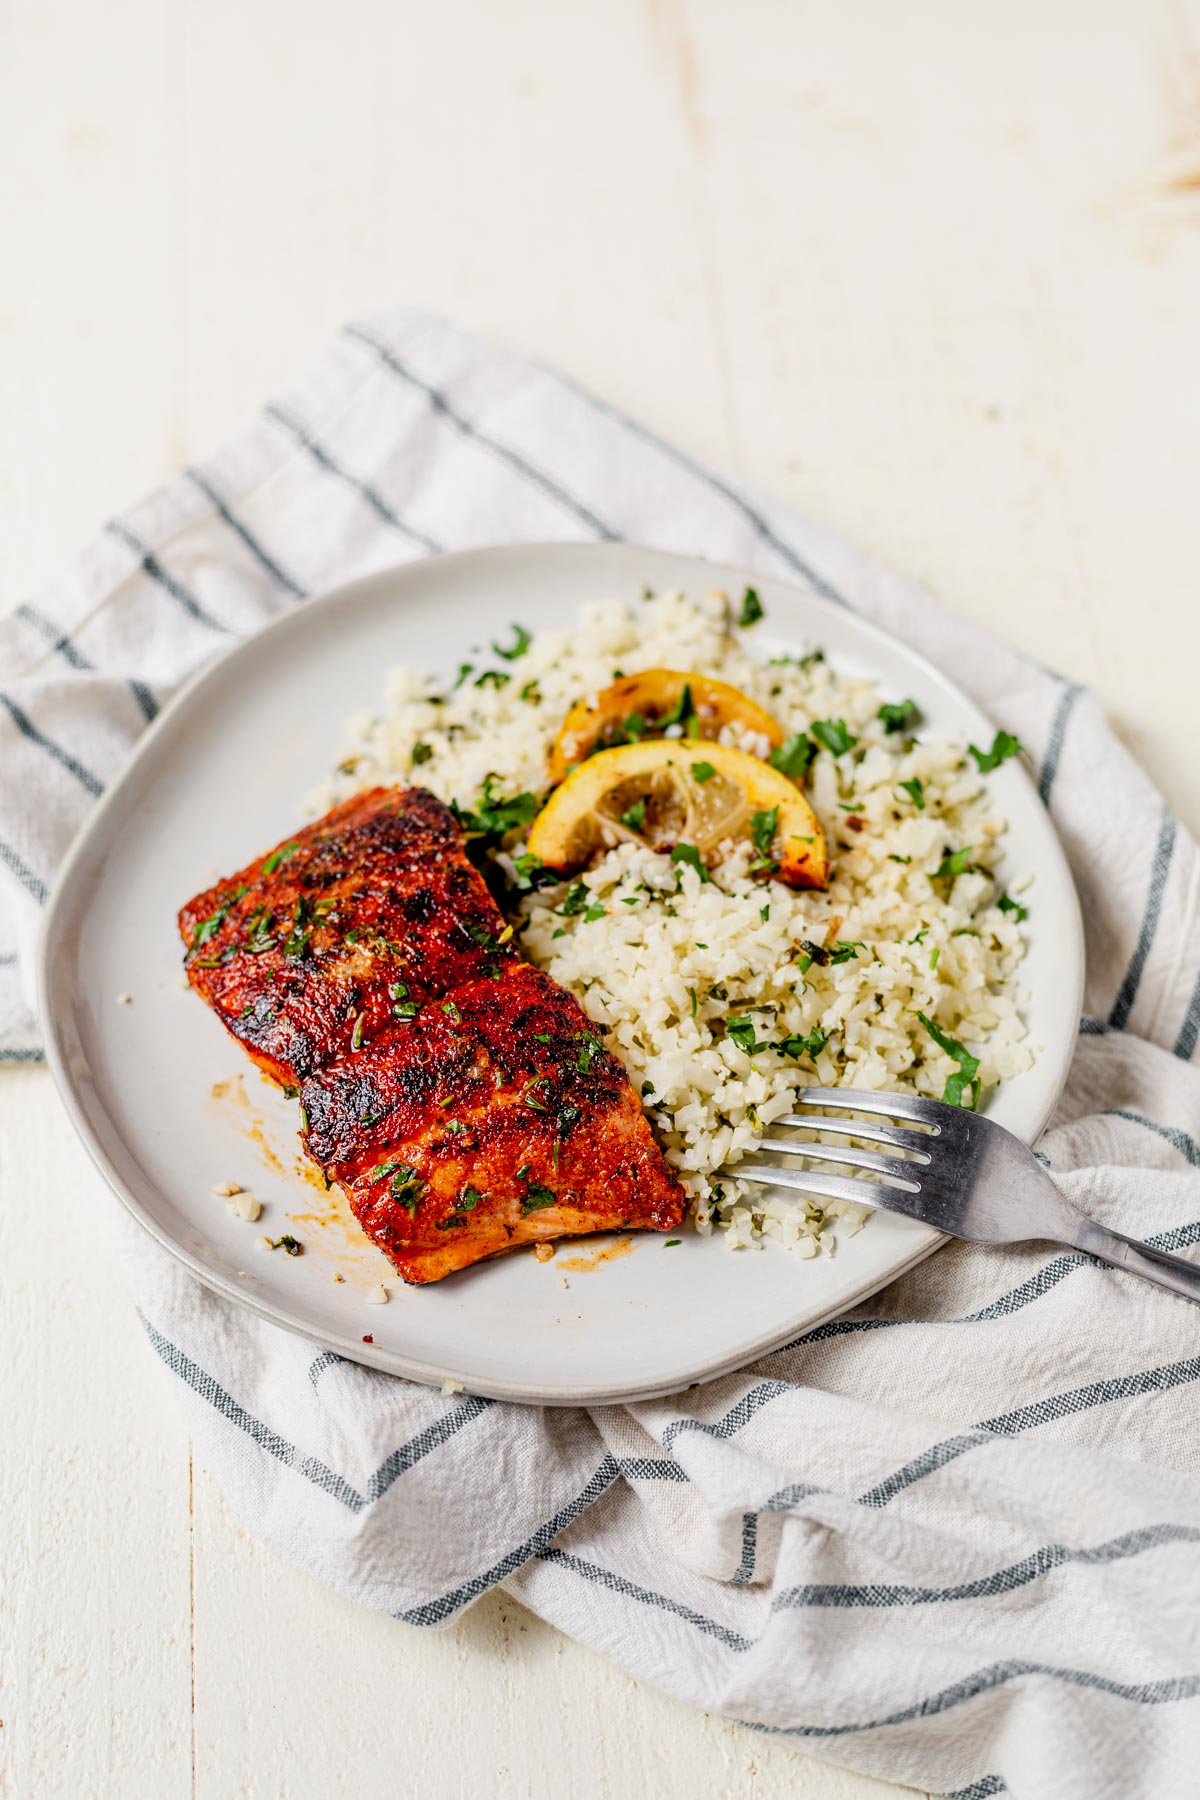 blackened salmon fillet on a plate with rice and parsley